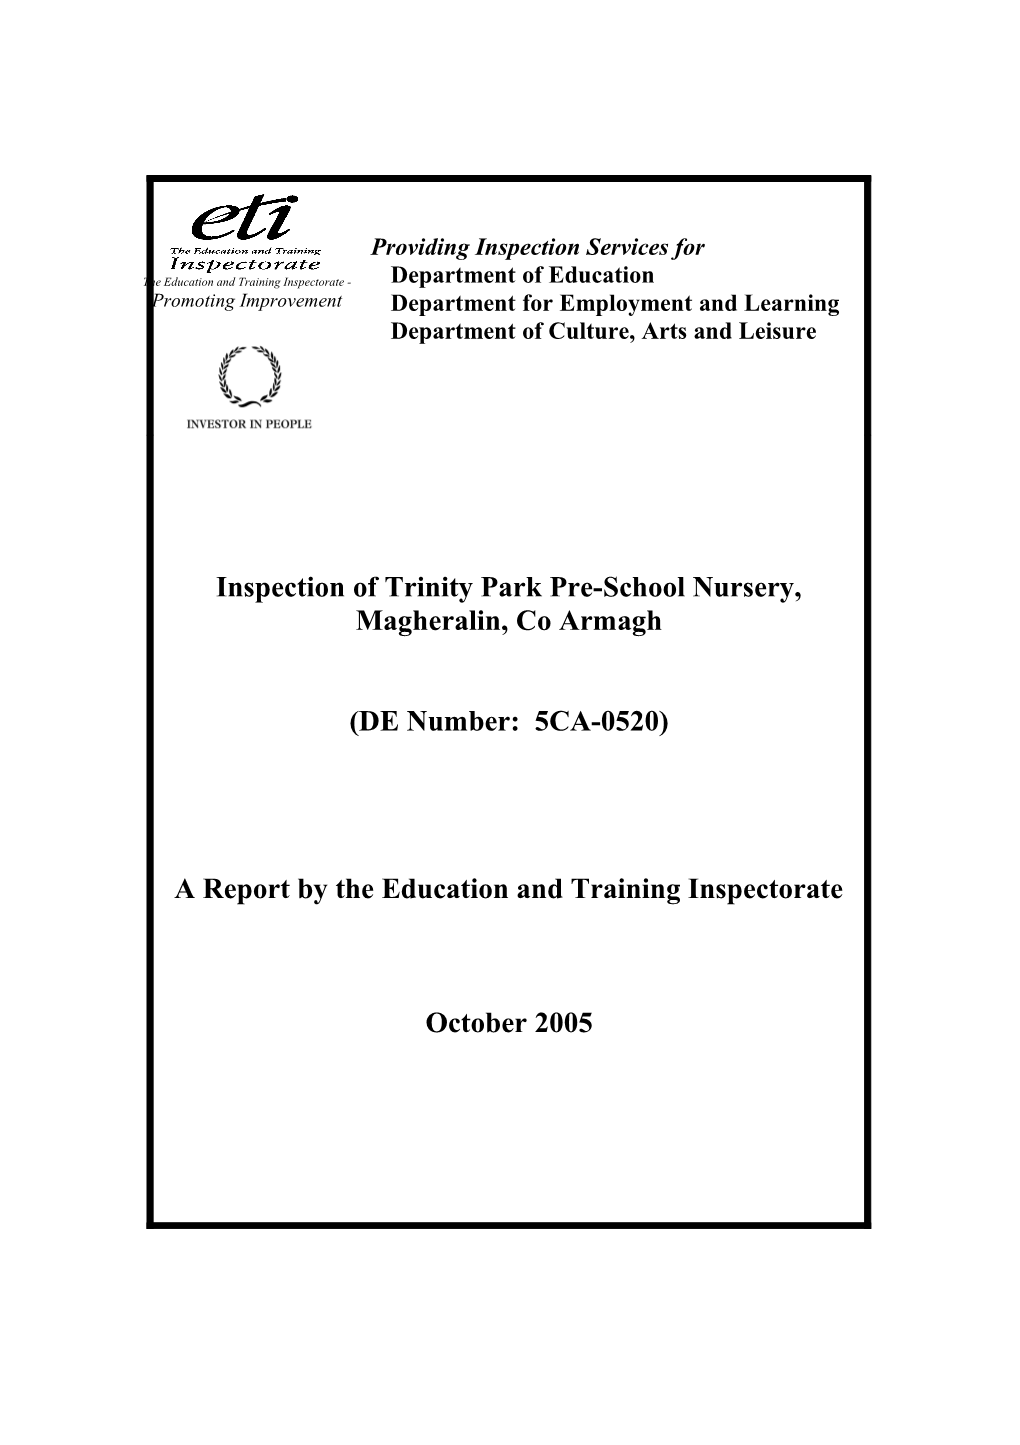 Report on the Inspection of Trinity Park Pre-School Nursery, Magheralin, Co Armagh, October